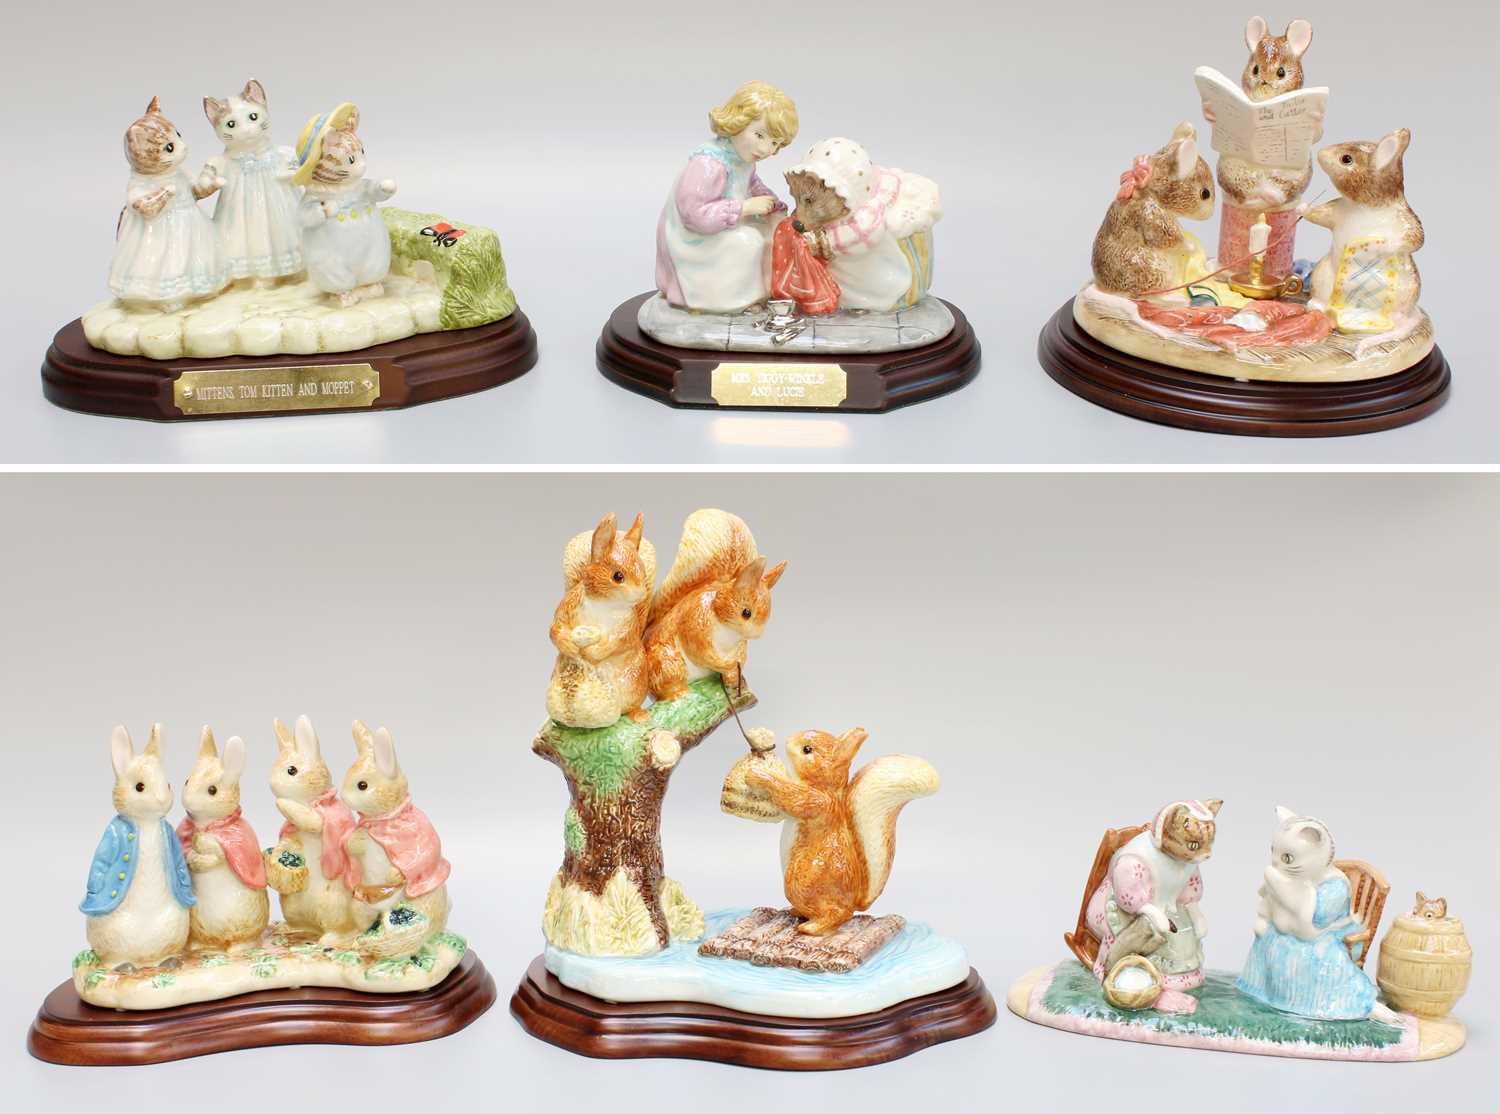 Beswick Beatrix Potter Tableaus: including 'Mrs Tiggy-Winkle and Lucie', model No. P3867, limited